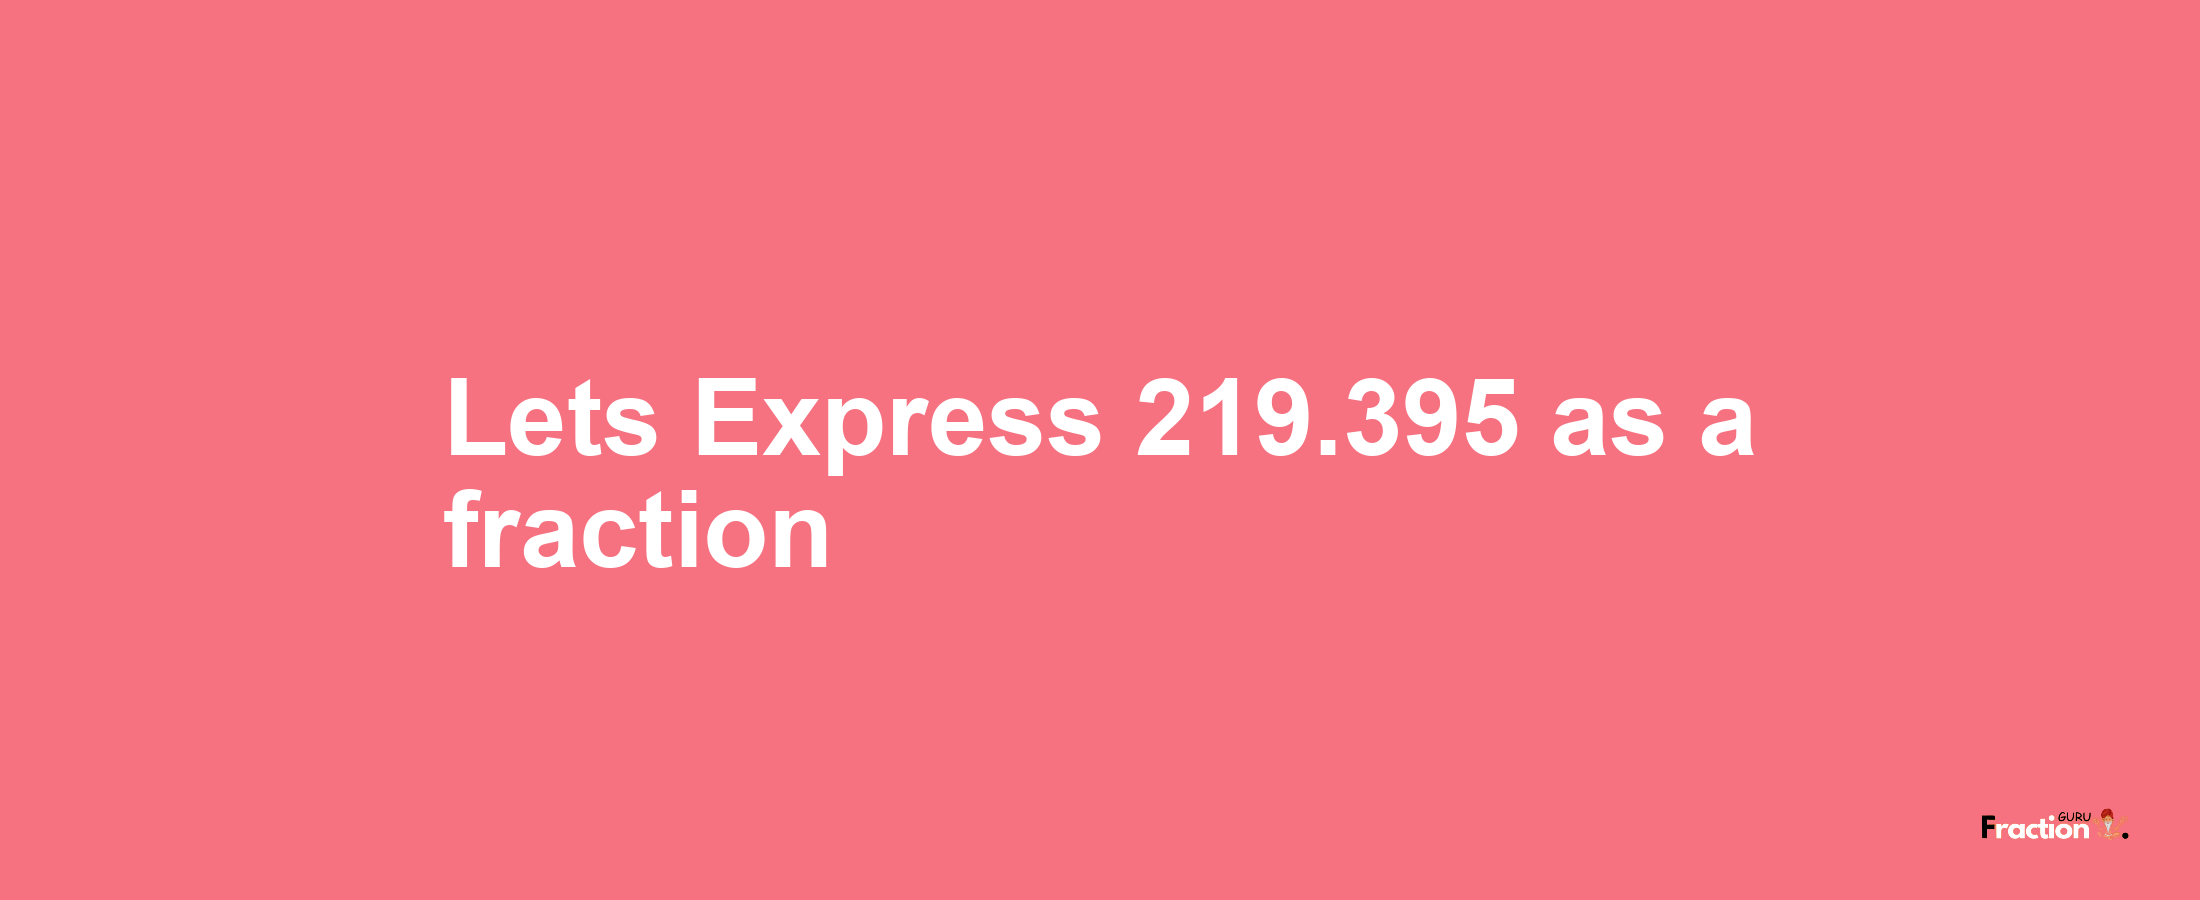 Lets Express 219.395 as afraction